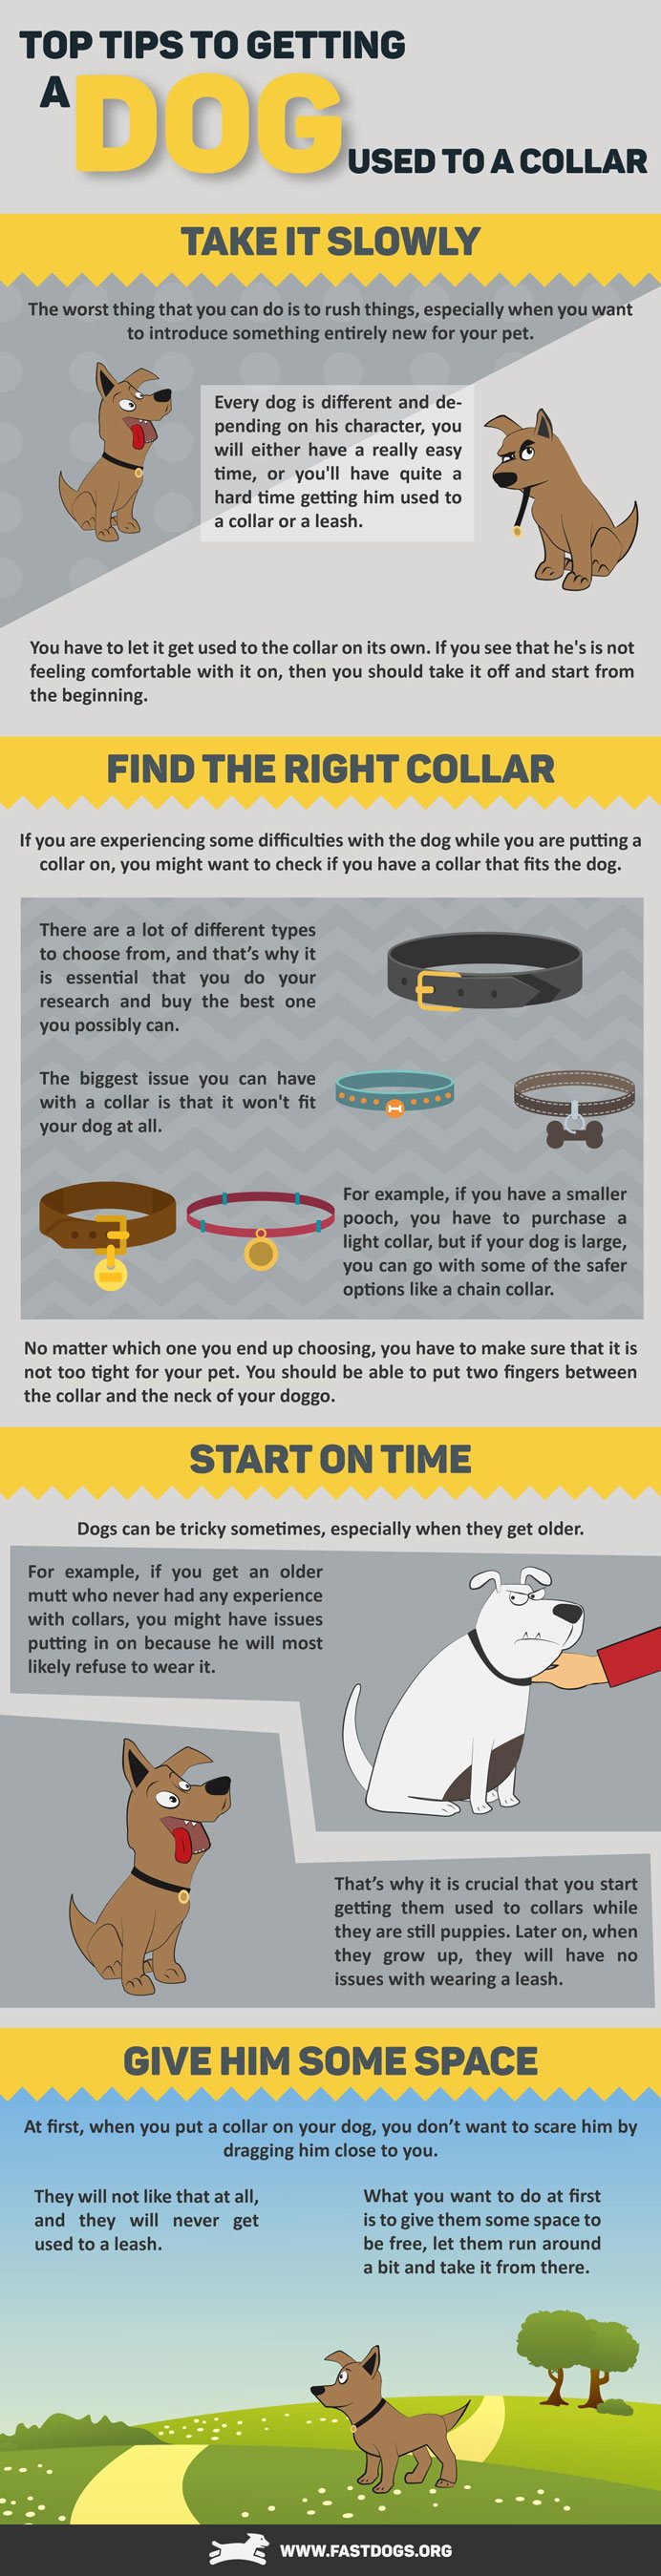 Top Tips to Getting a Dog Used to a Collar